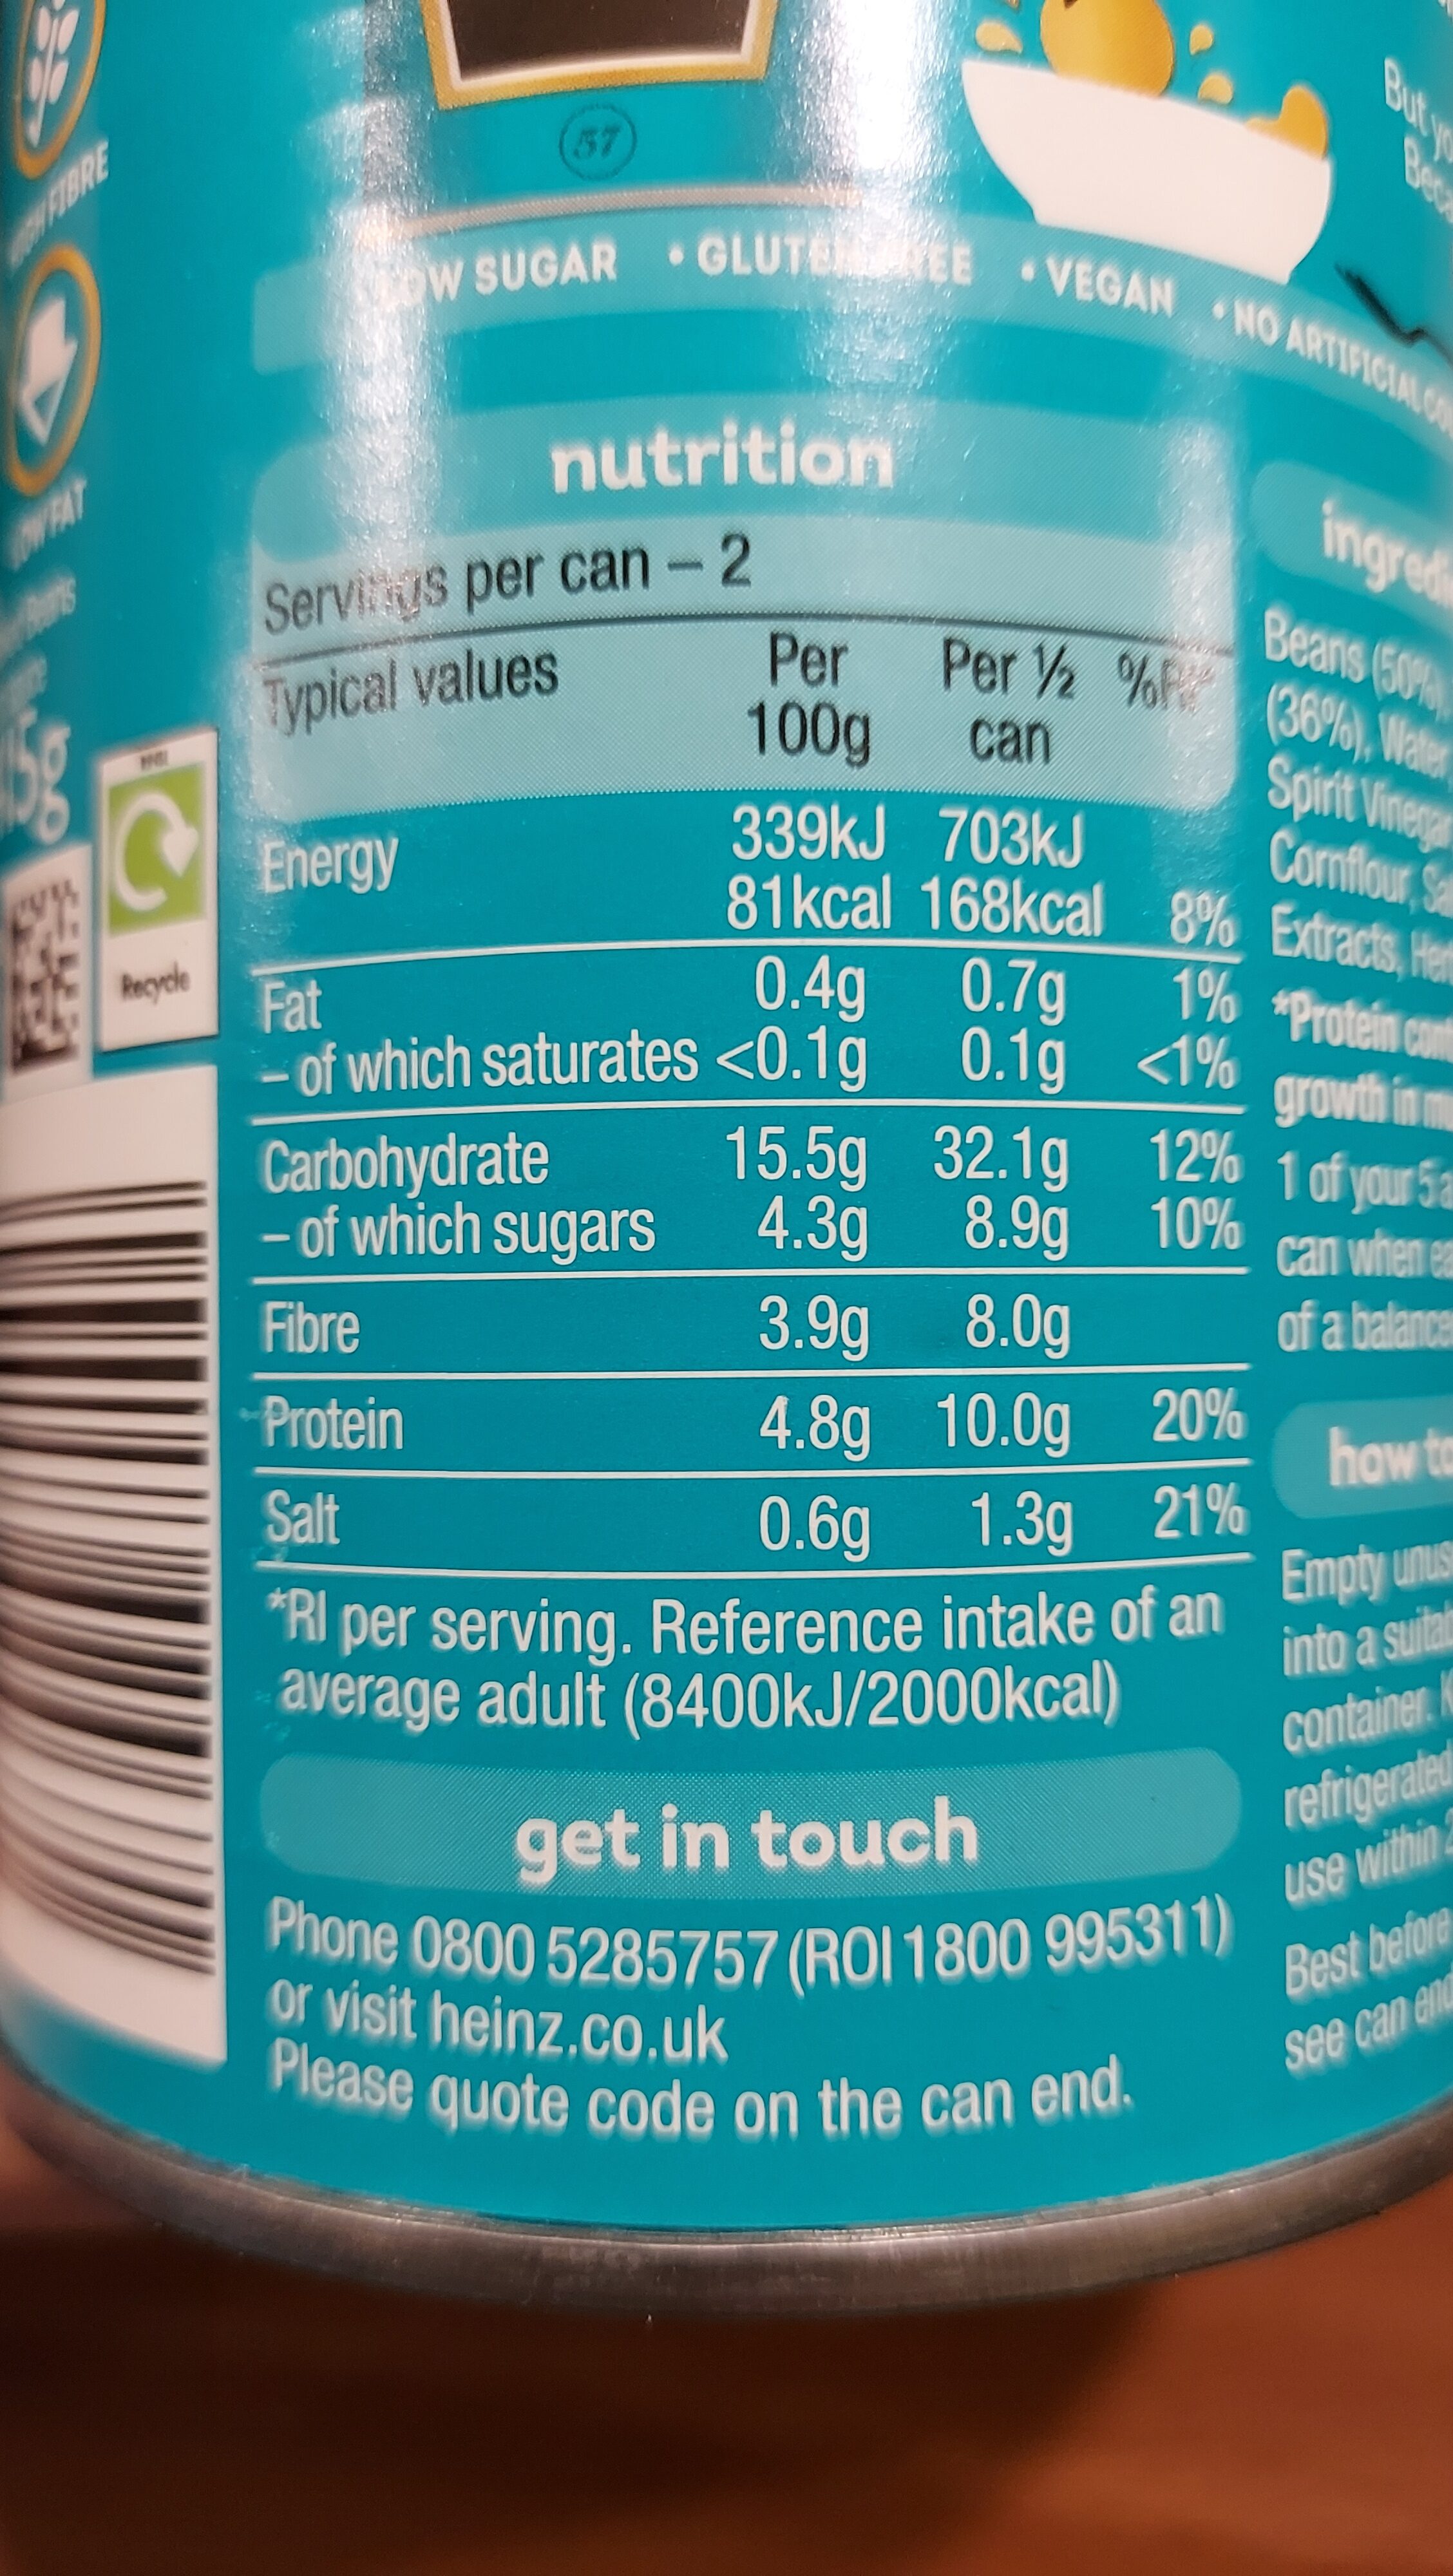 Beanz In a rich tomato sauce - Nutrition facts